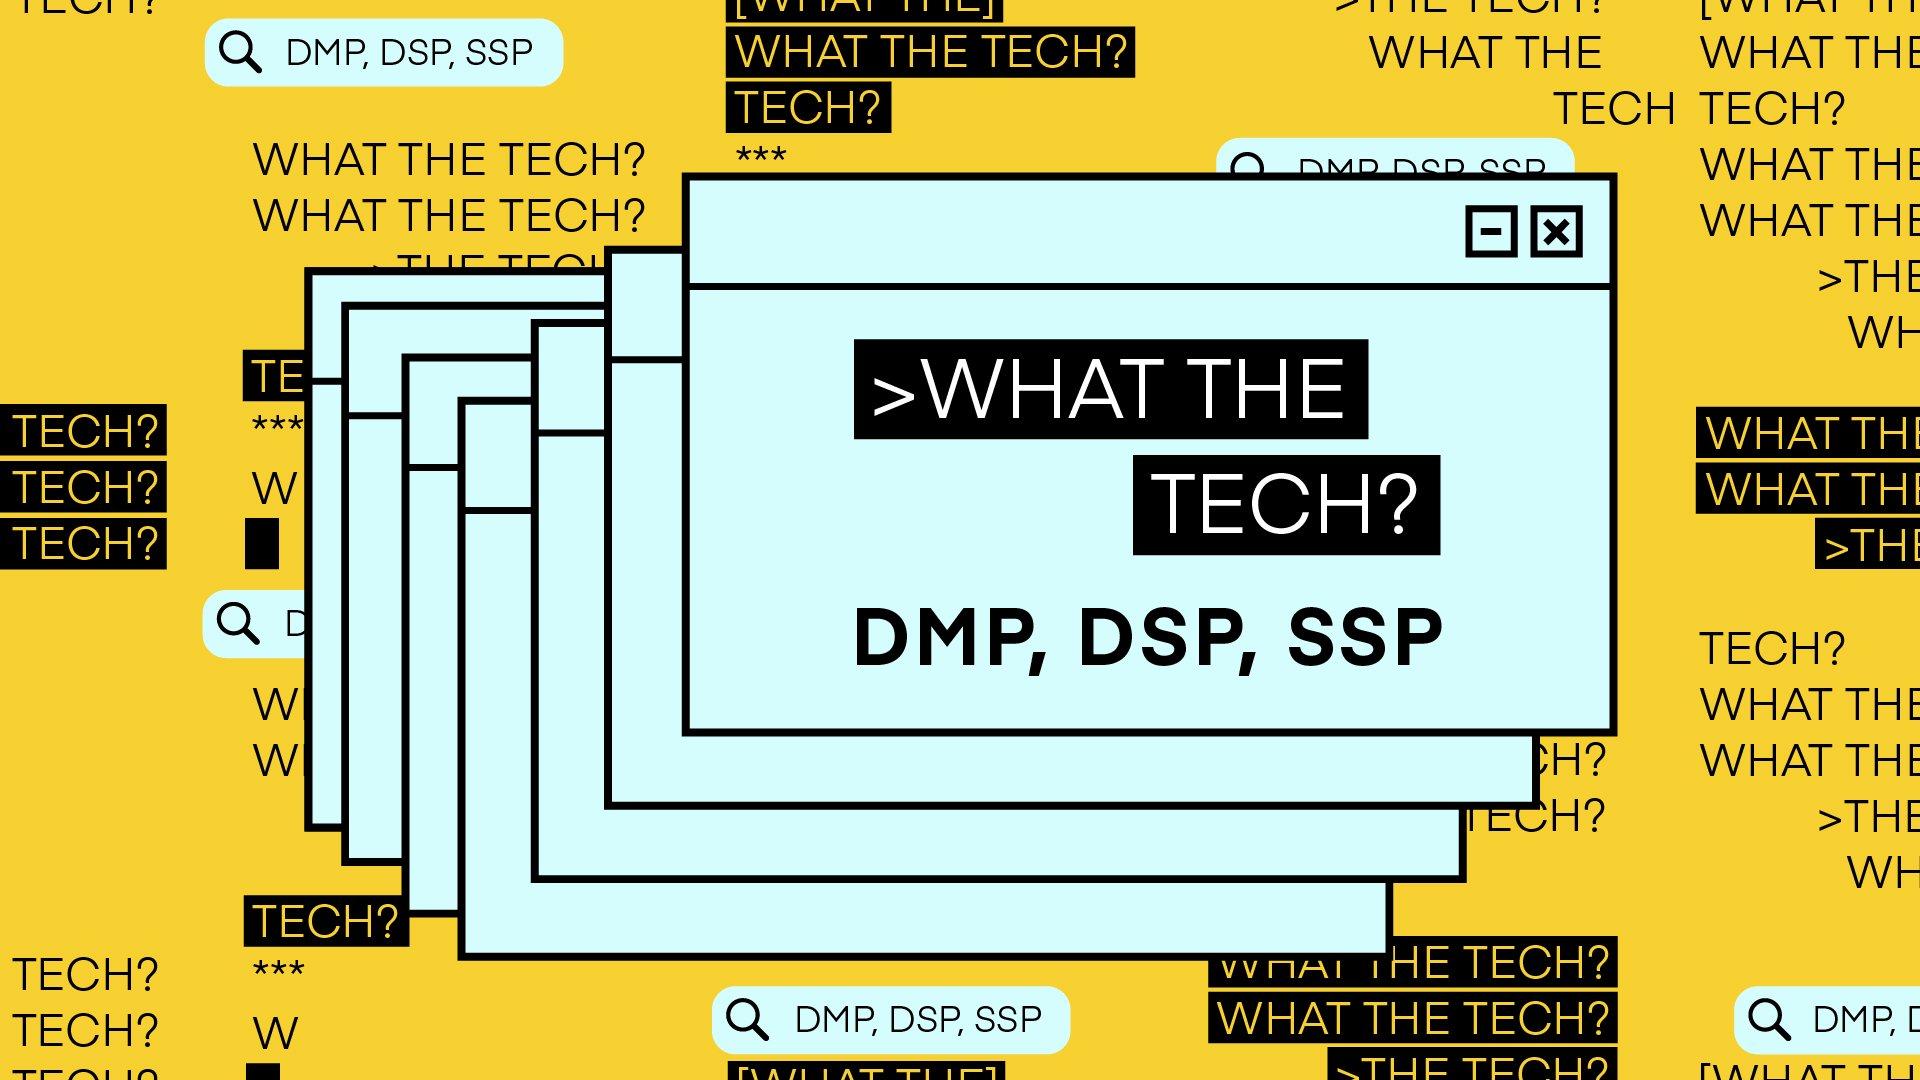 What the Tech are DSPs, SSPs, and DMPs?